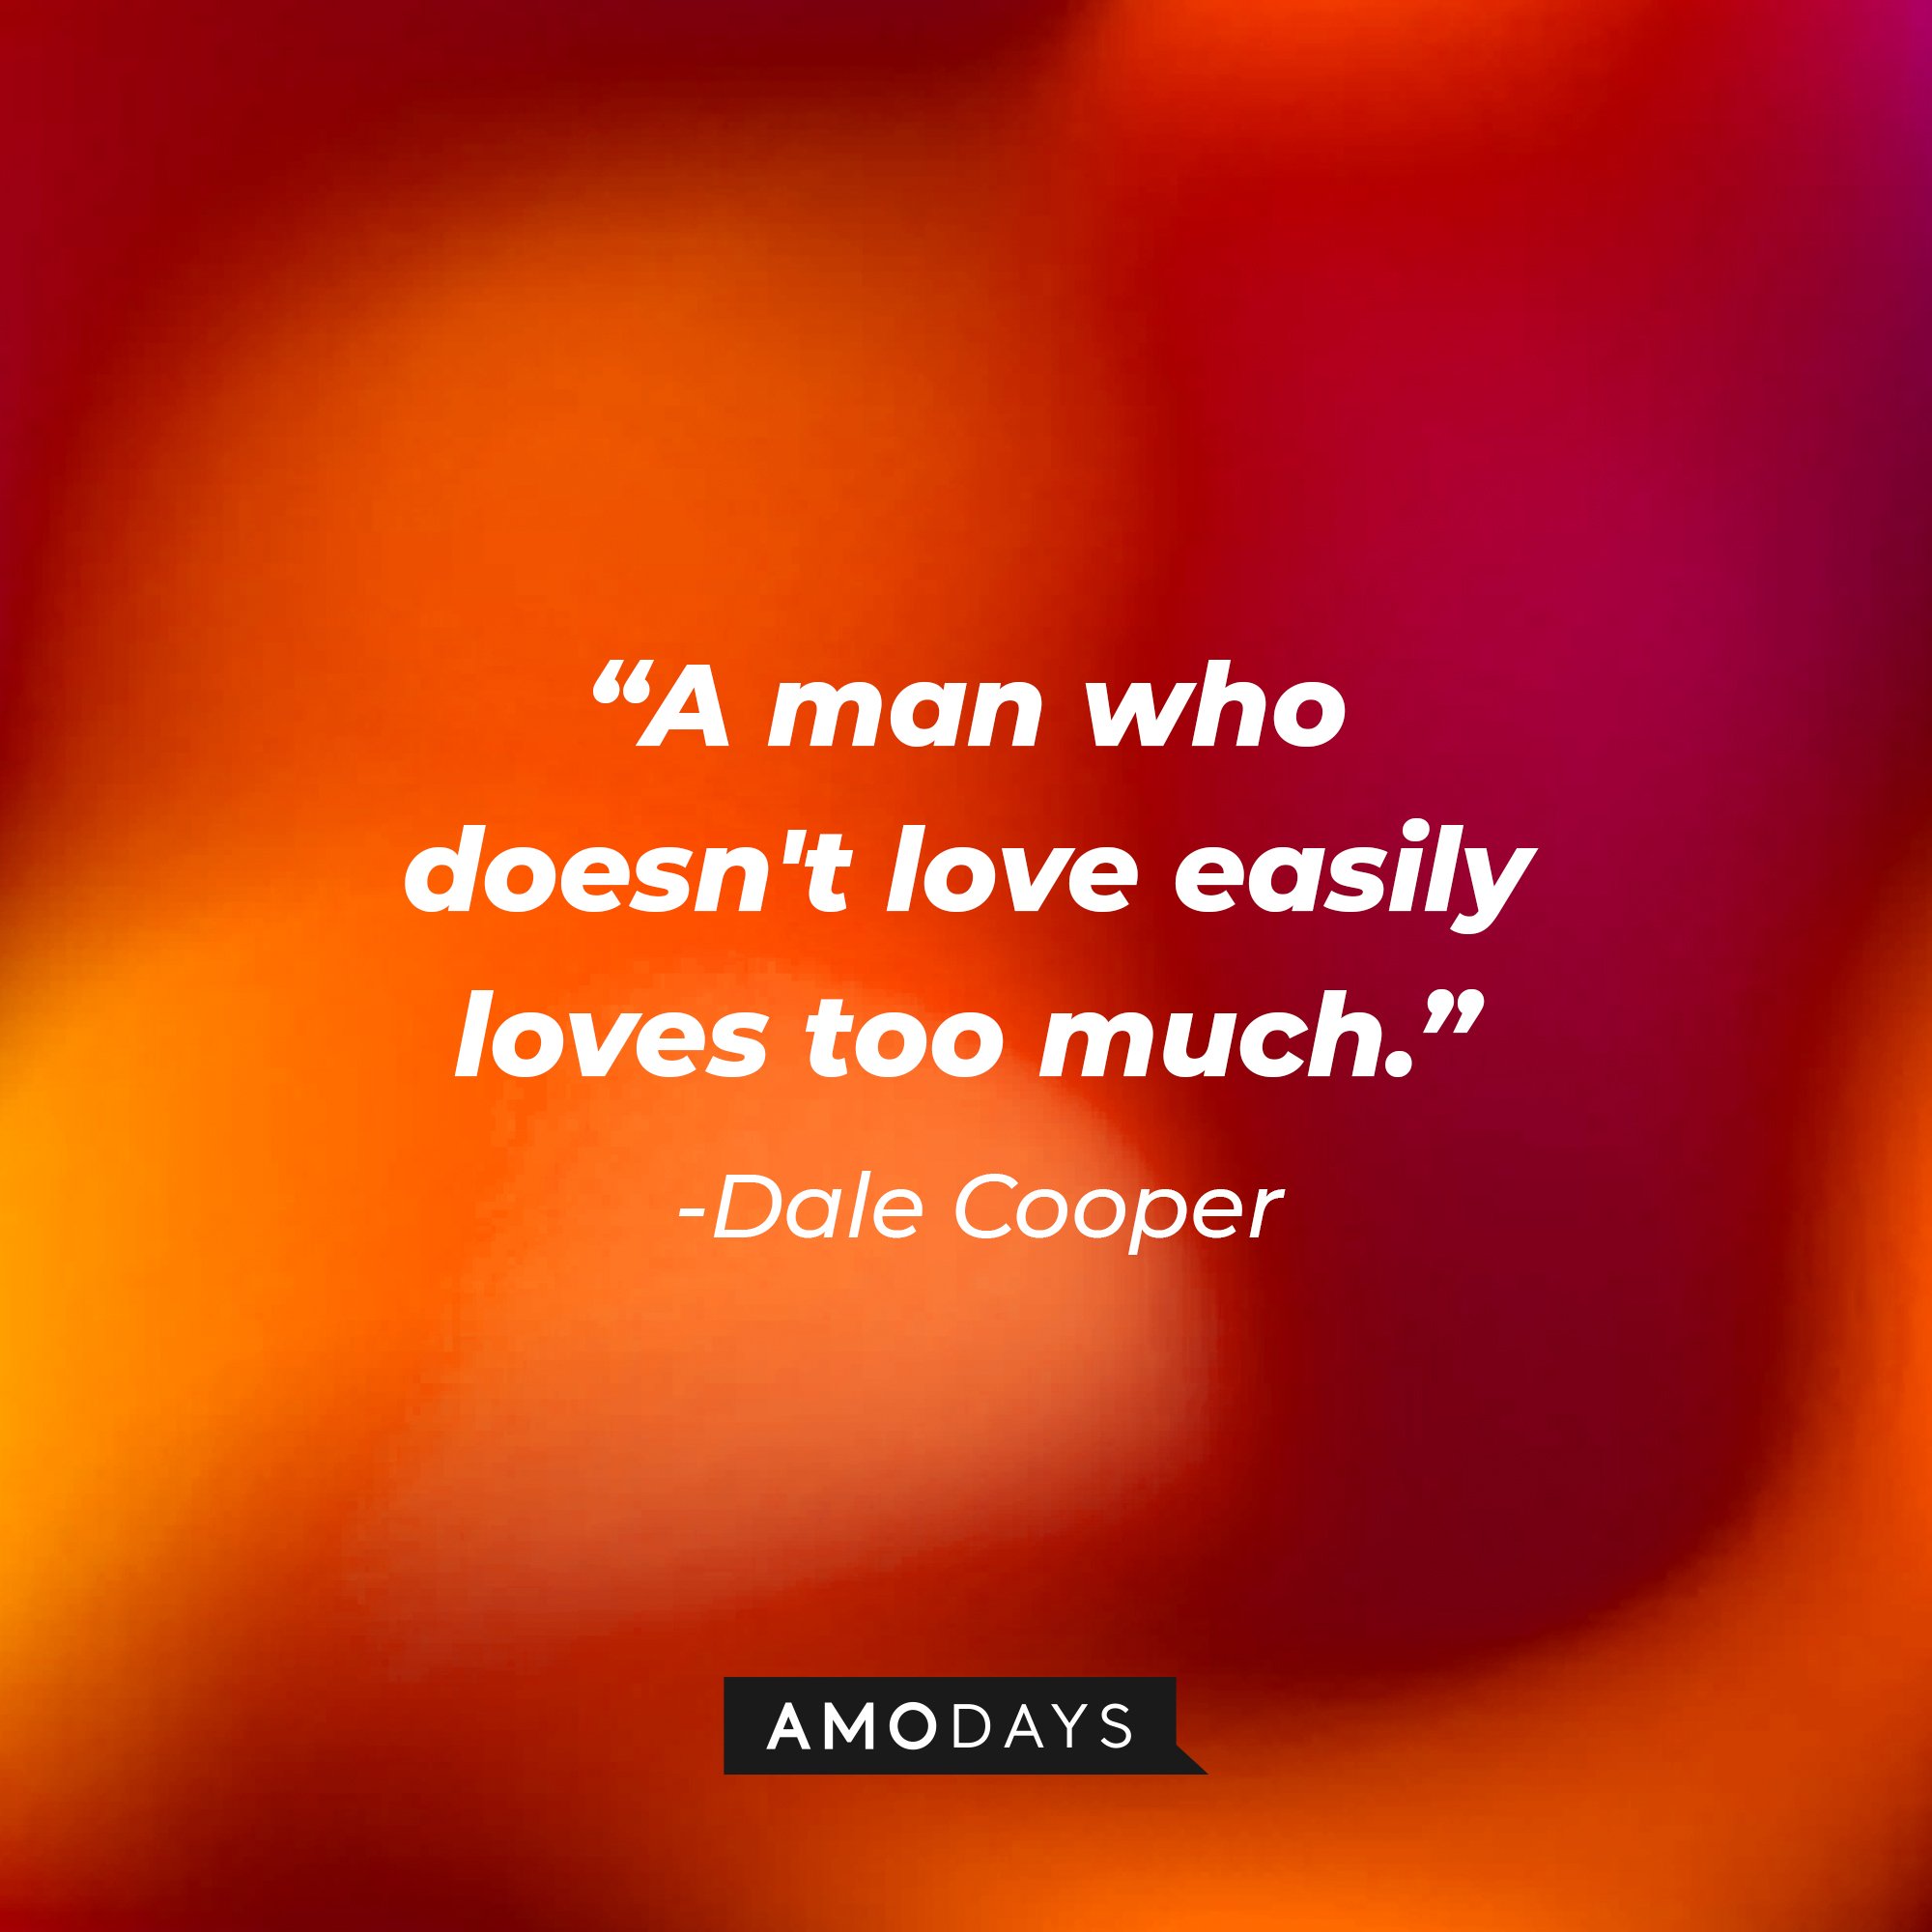 Dale Cooper’s quote: "A man who doesn't love easily loves too much." | Image: AmoDays